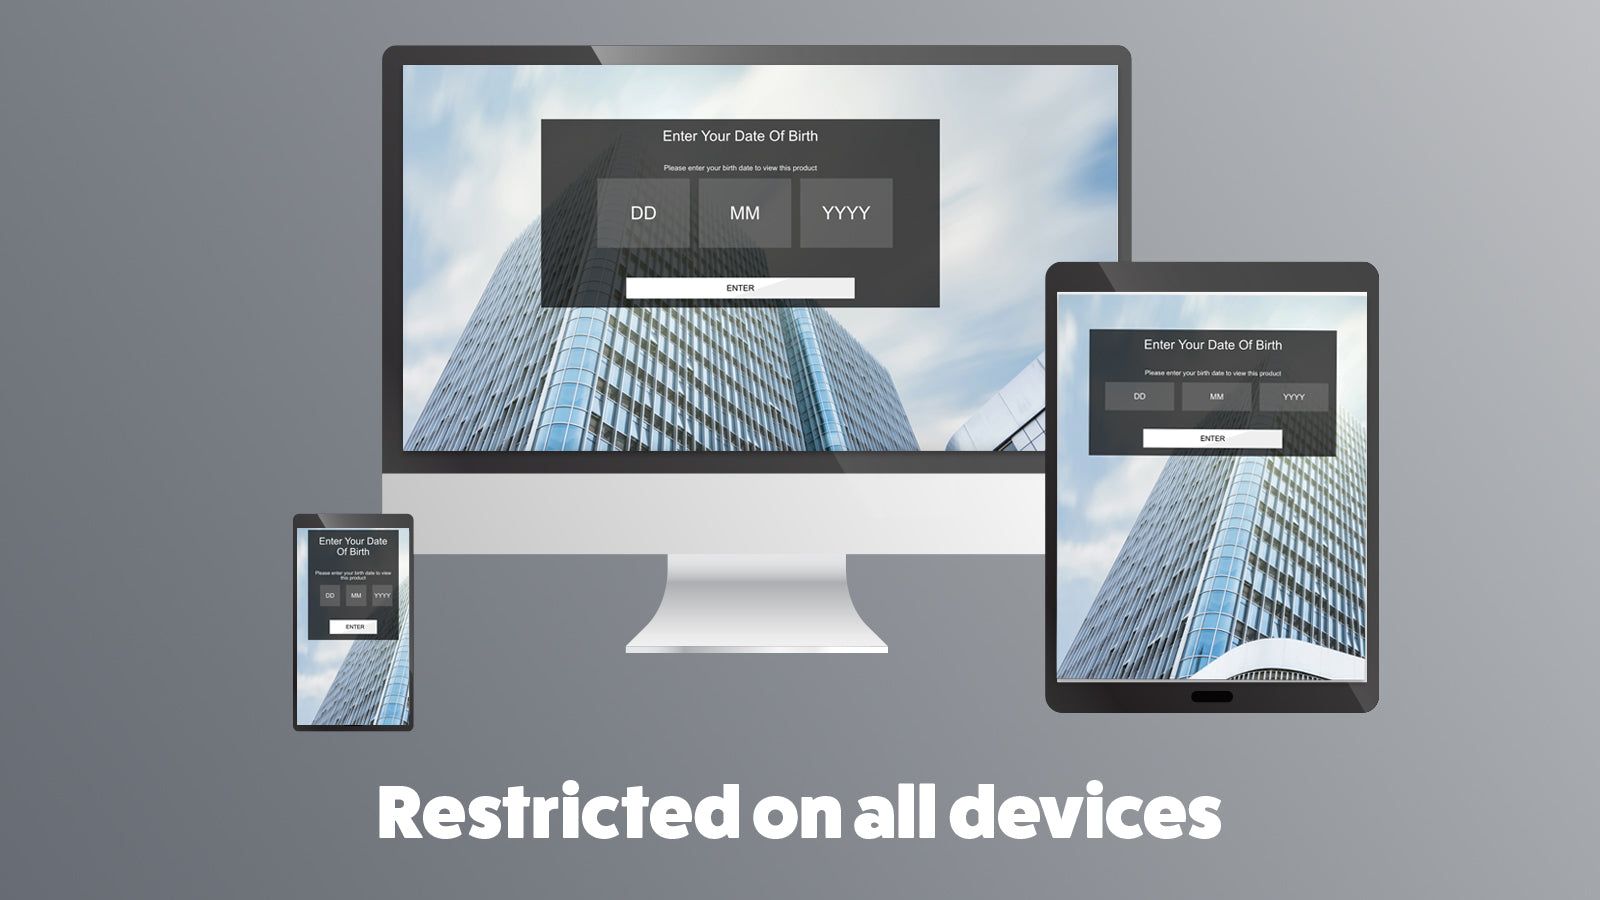 Restricted on all devices